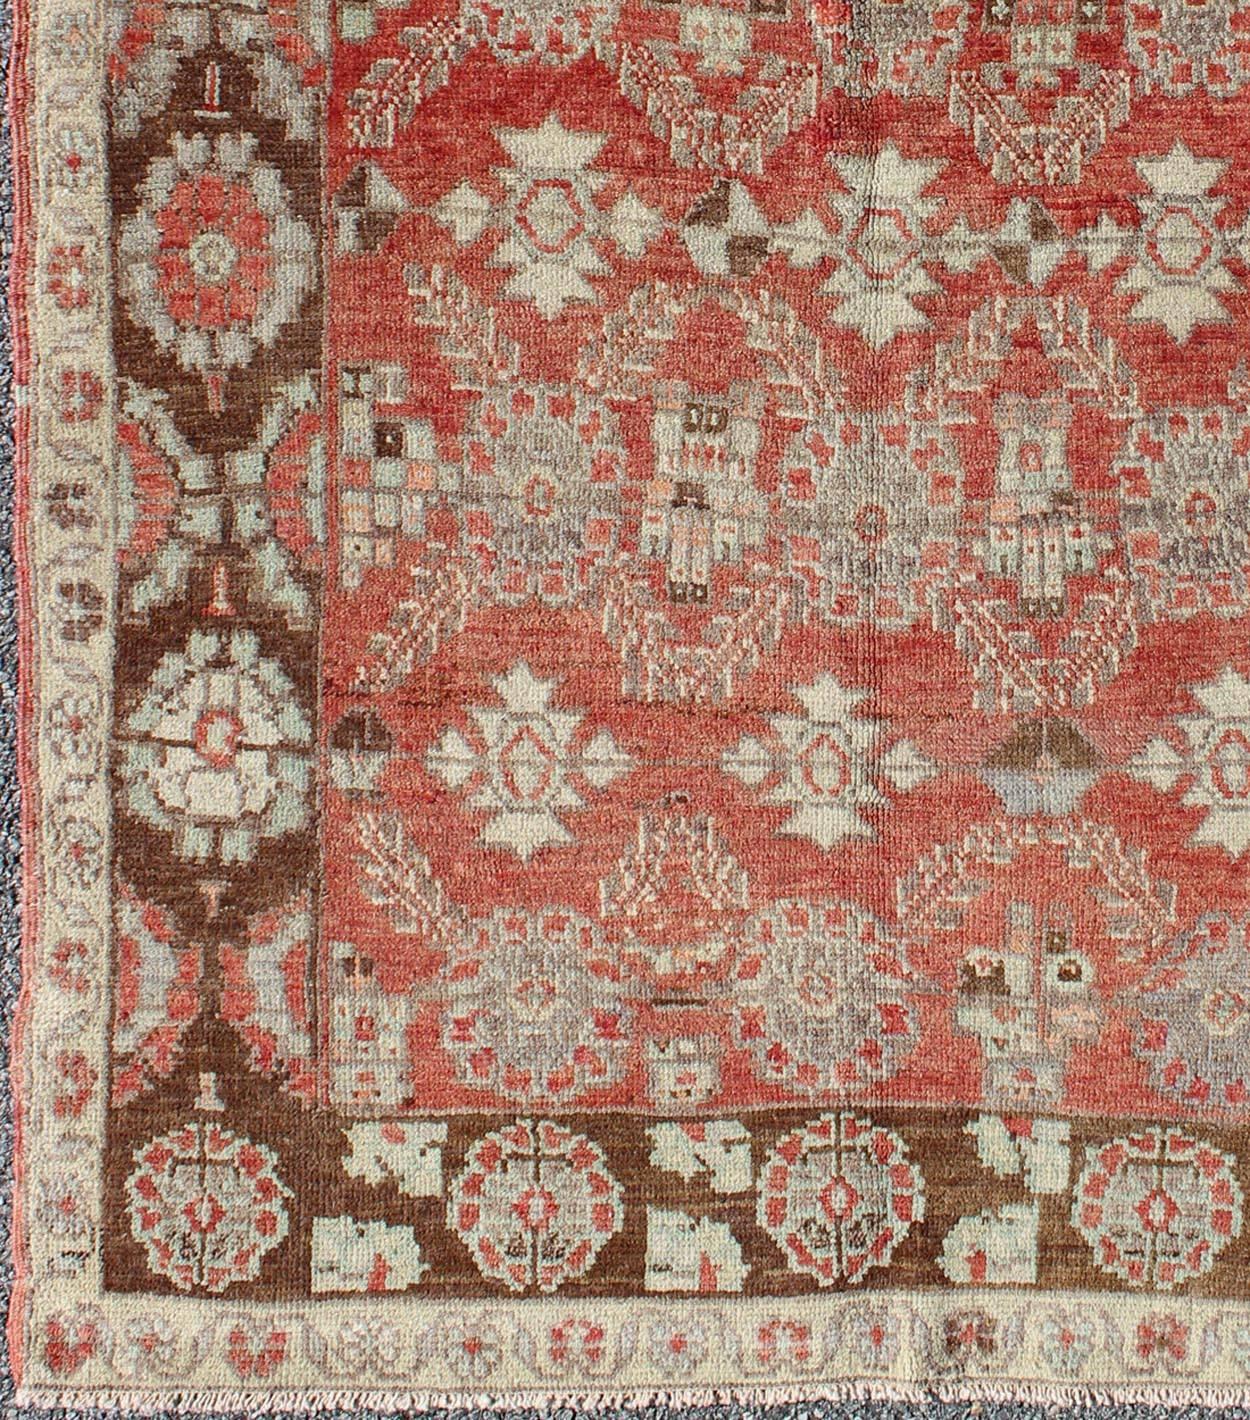 Vintage Oushak Carpet with Interconnected Floral Designs. Keivan Woven Arts rug# EN-142192 origin/turkey

Measures: 3'8 x 5'6

This vintage Oushak rug features an intricately beautiful design. The central field is composed of alternating and